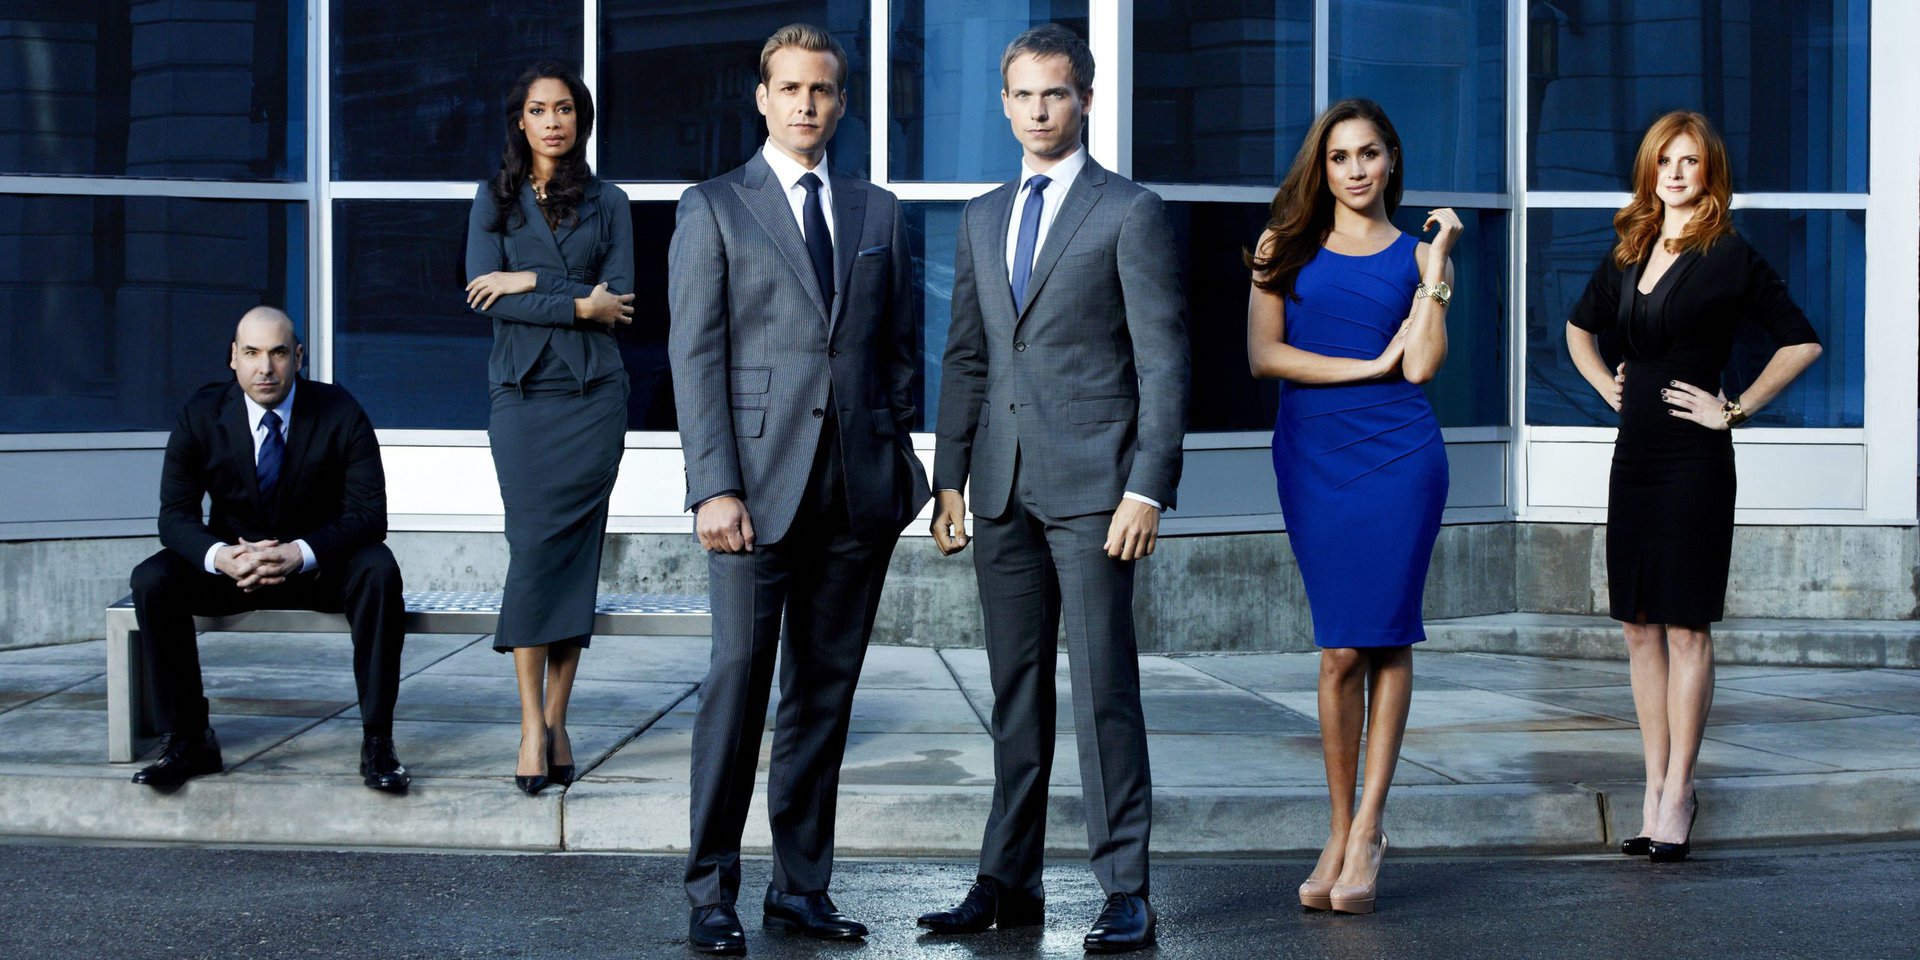 The suited and booted cast of Suits tv show woo